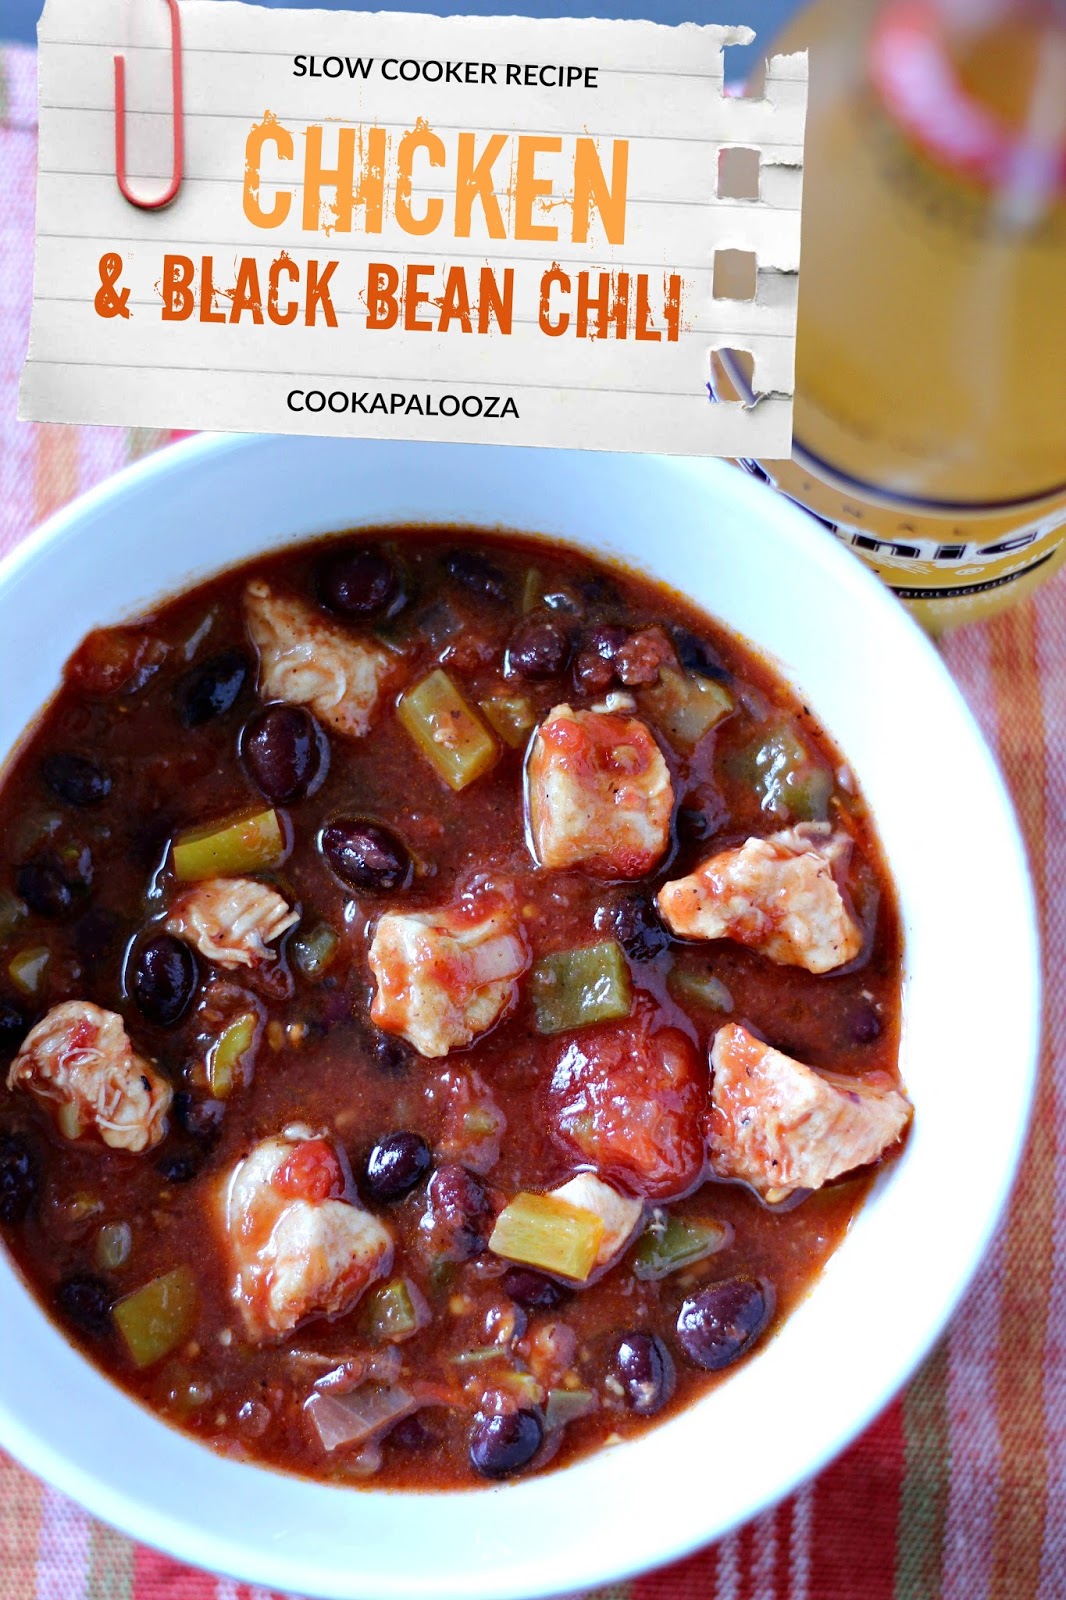 The Cook-a-Palooza Experience: Slow Cooker Chicken and Black Bean Chili